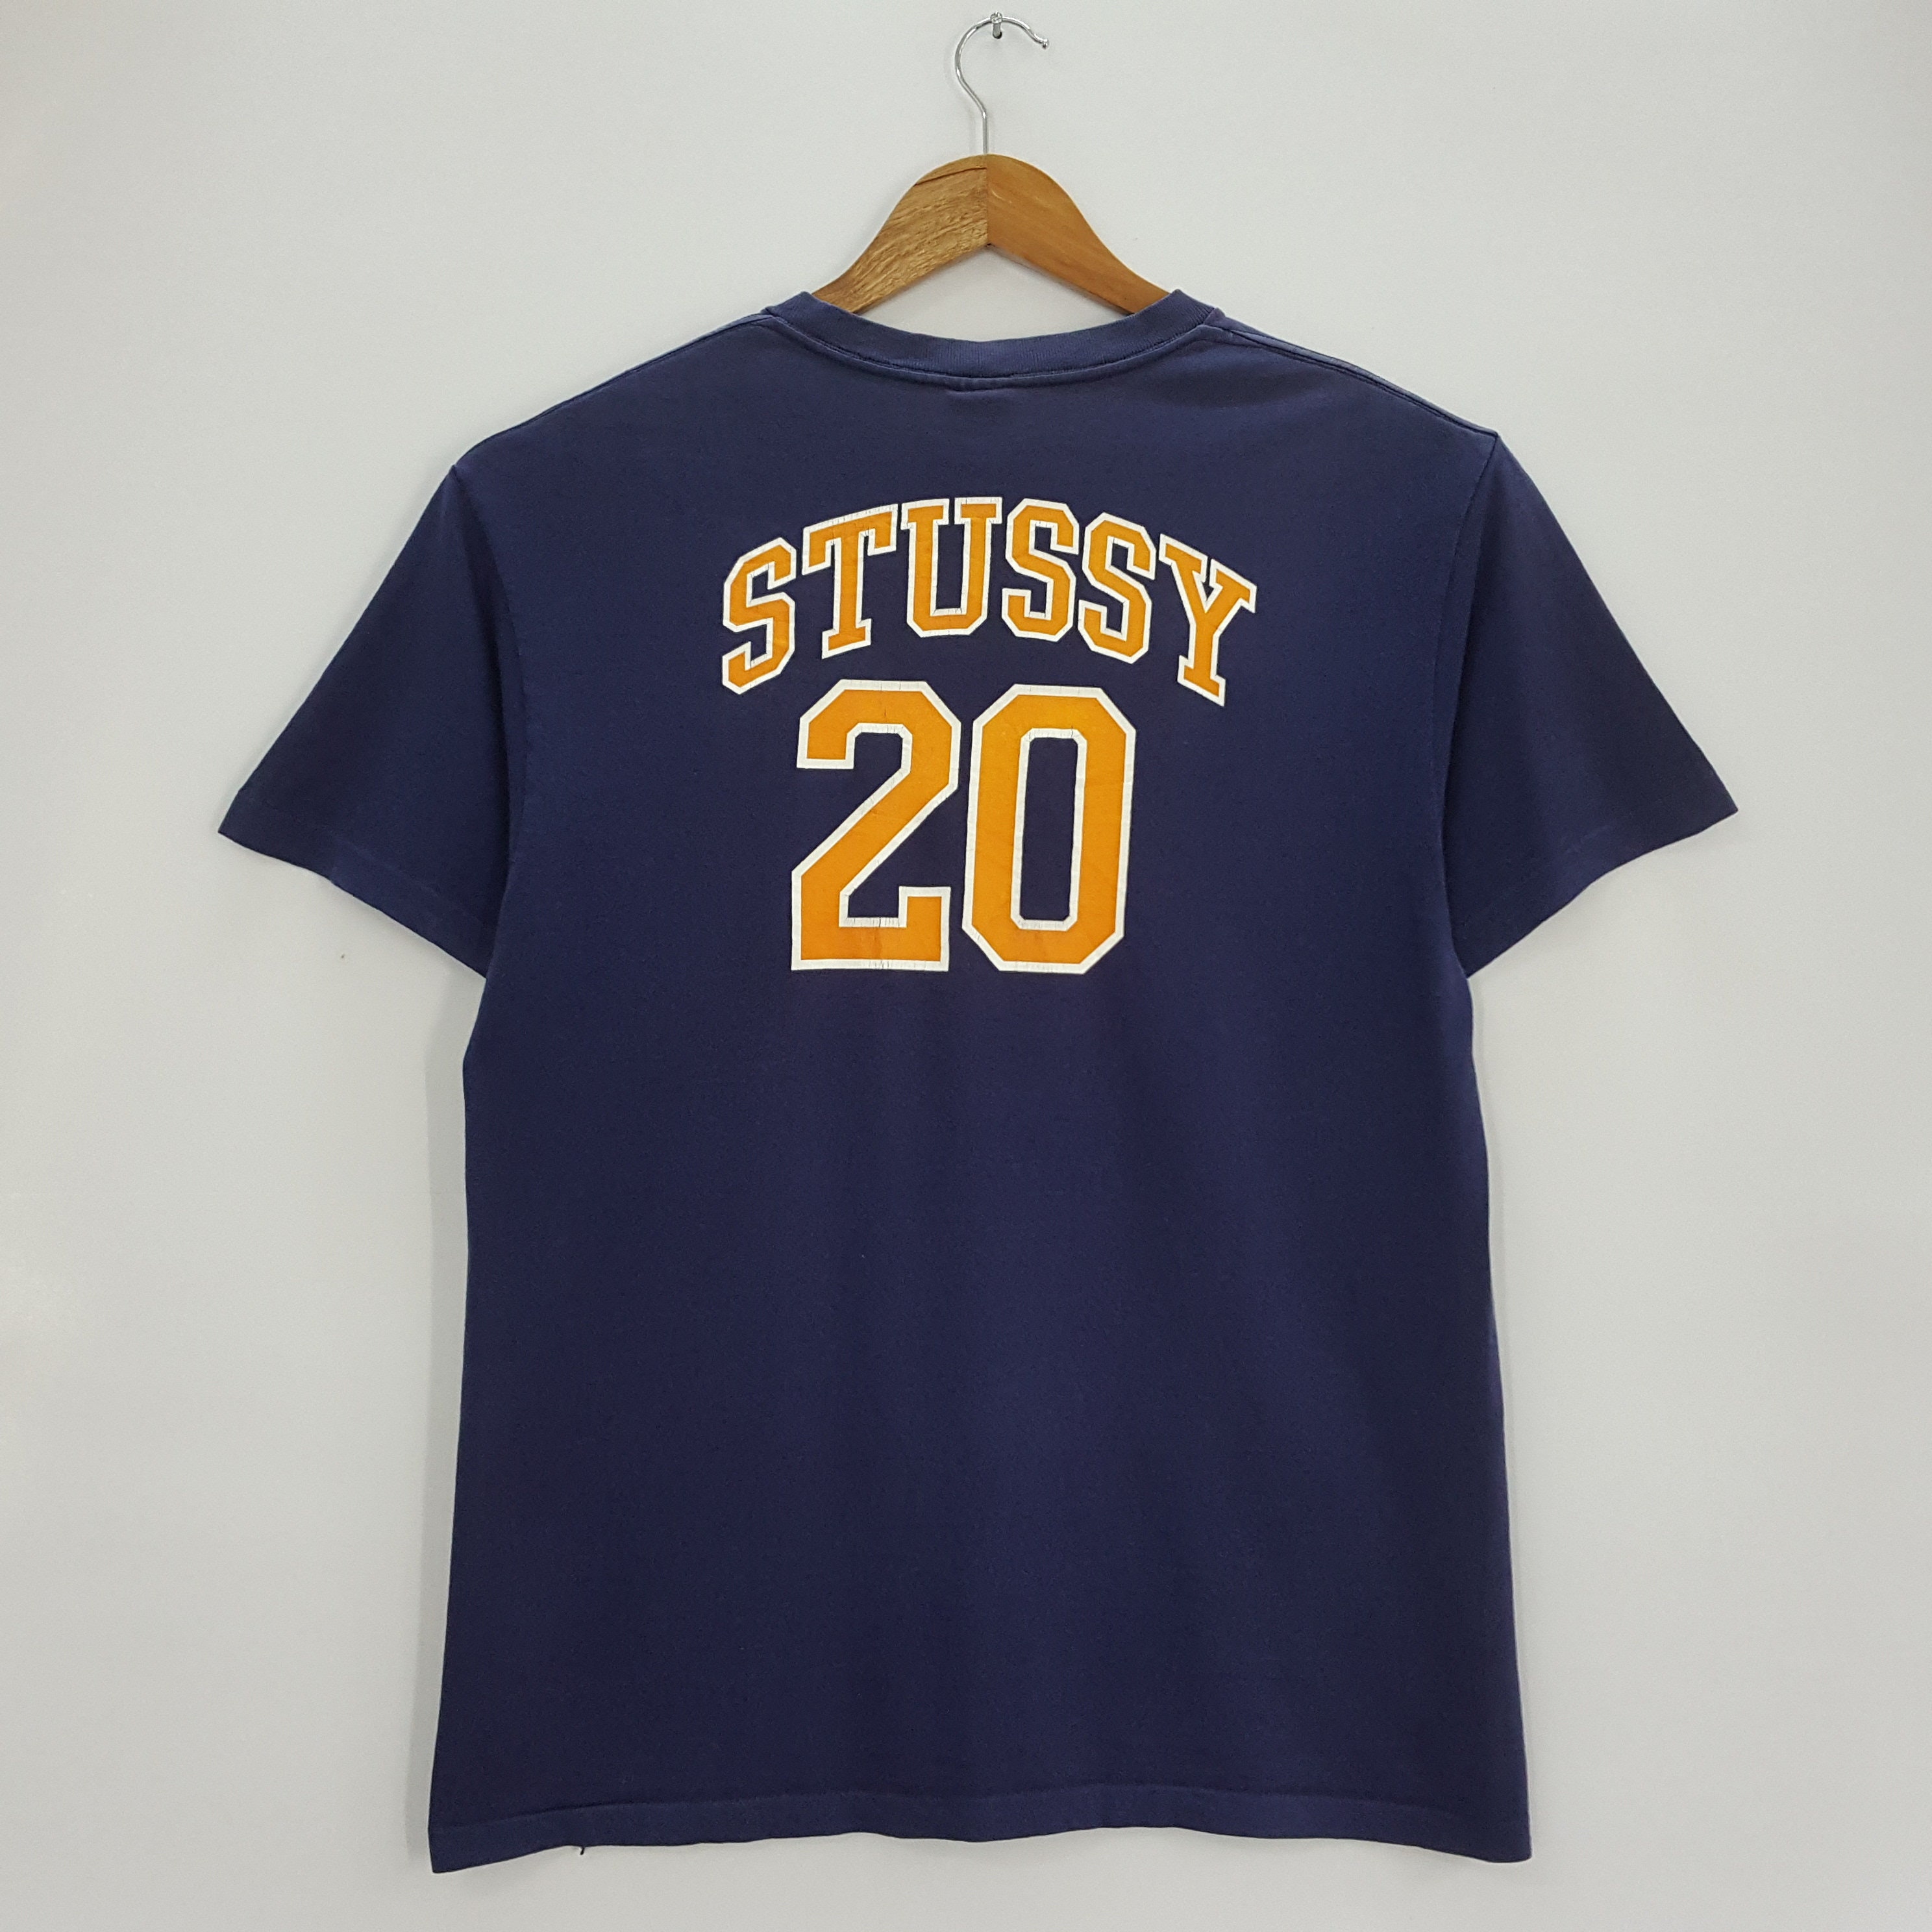 MyWay19 Vintage Stussy x NY Yankees Design T-Shirt Made in USA